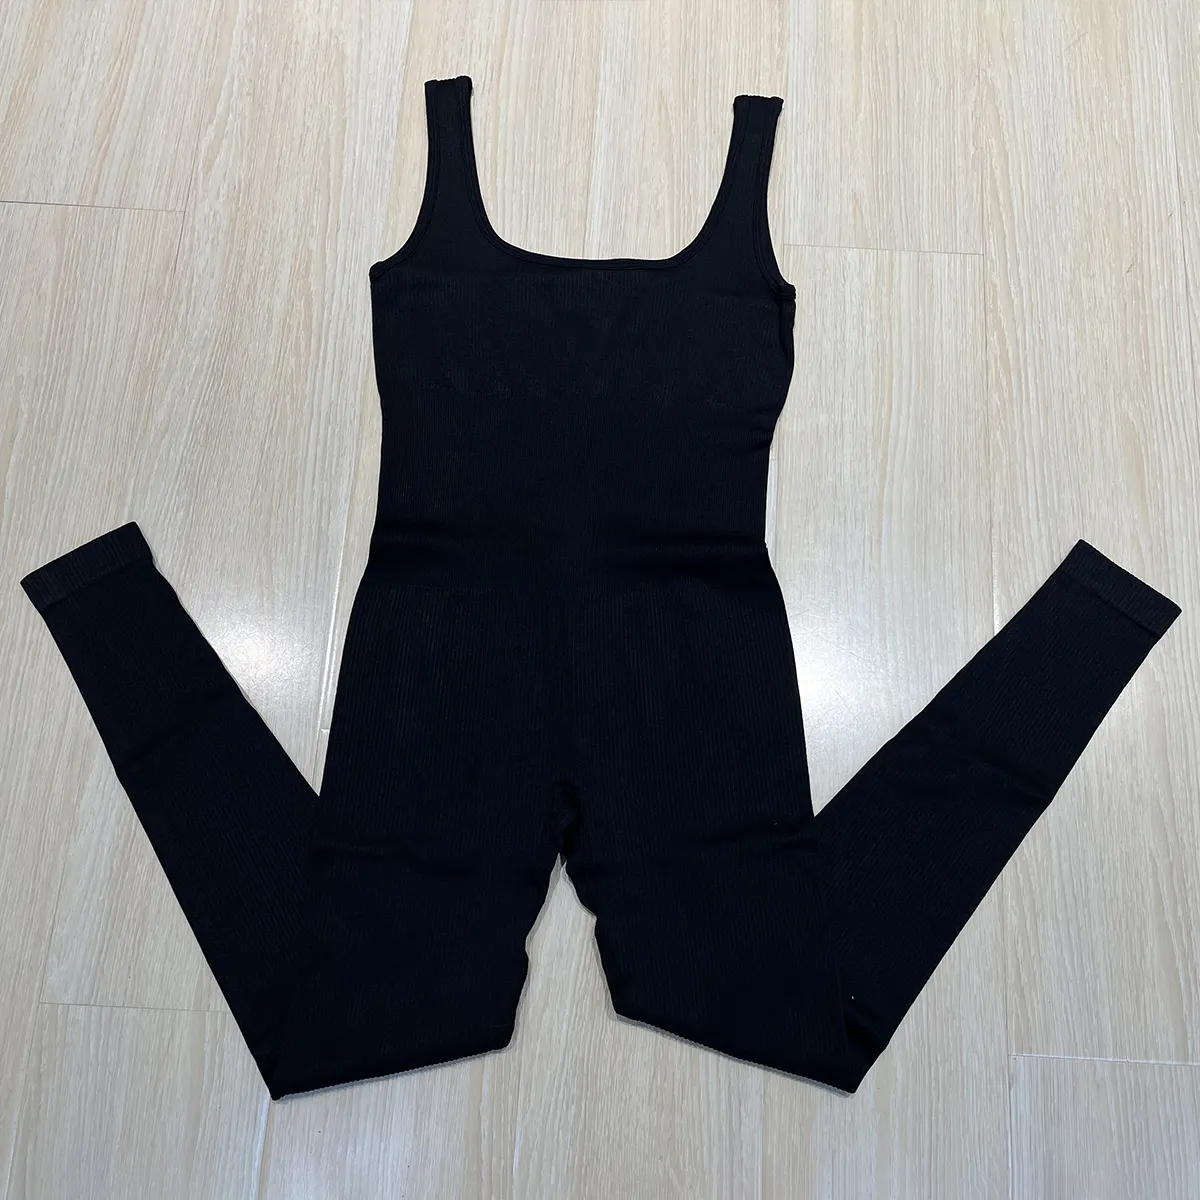 Women's Yoga Ribbed One Piece Tank Tops Rompers Sleeveless Exercise Jumpsuits Sport Jumpsuits